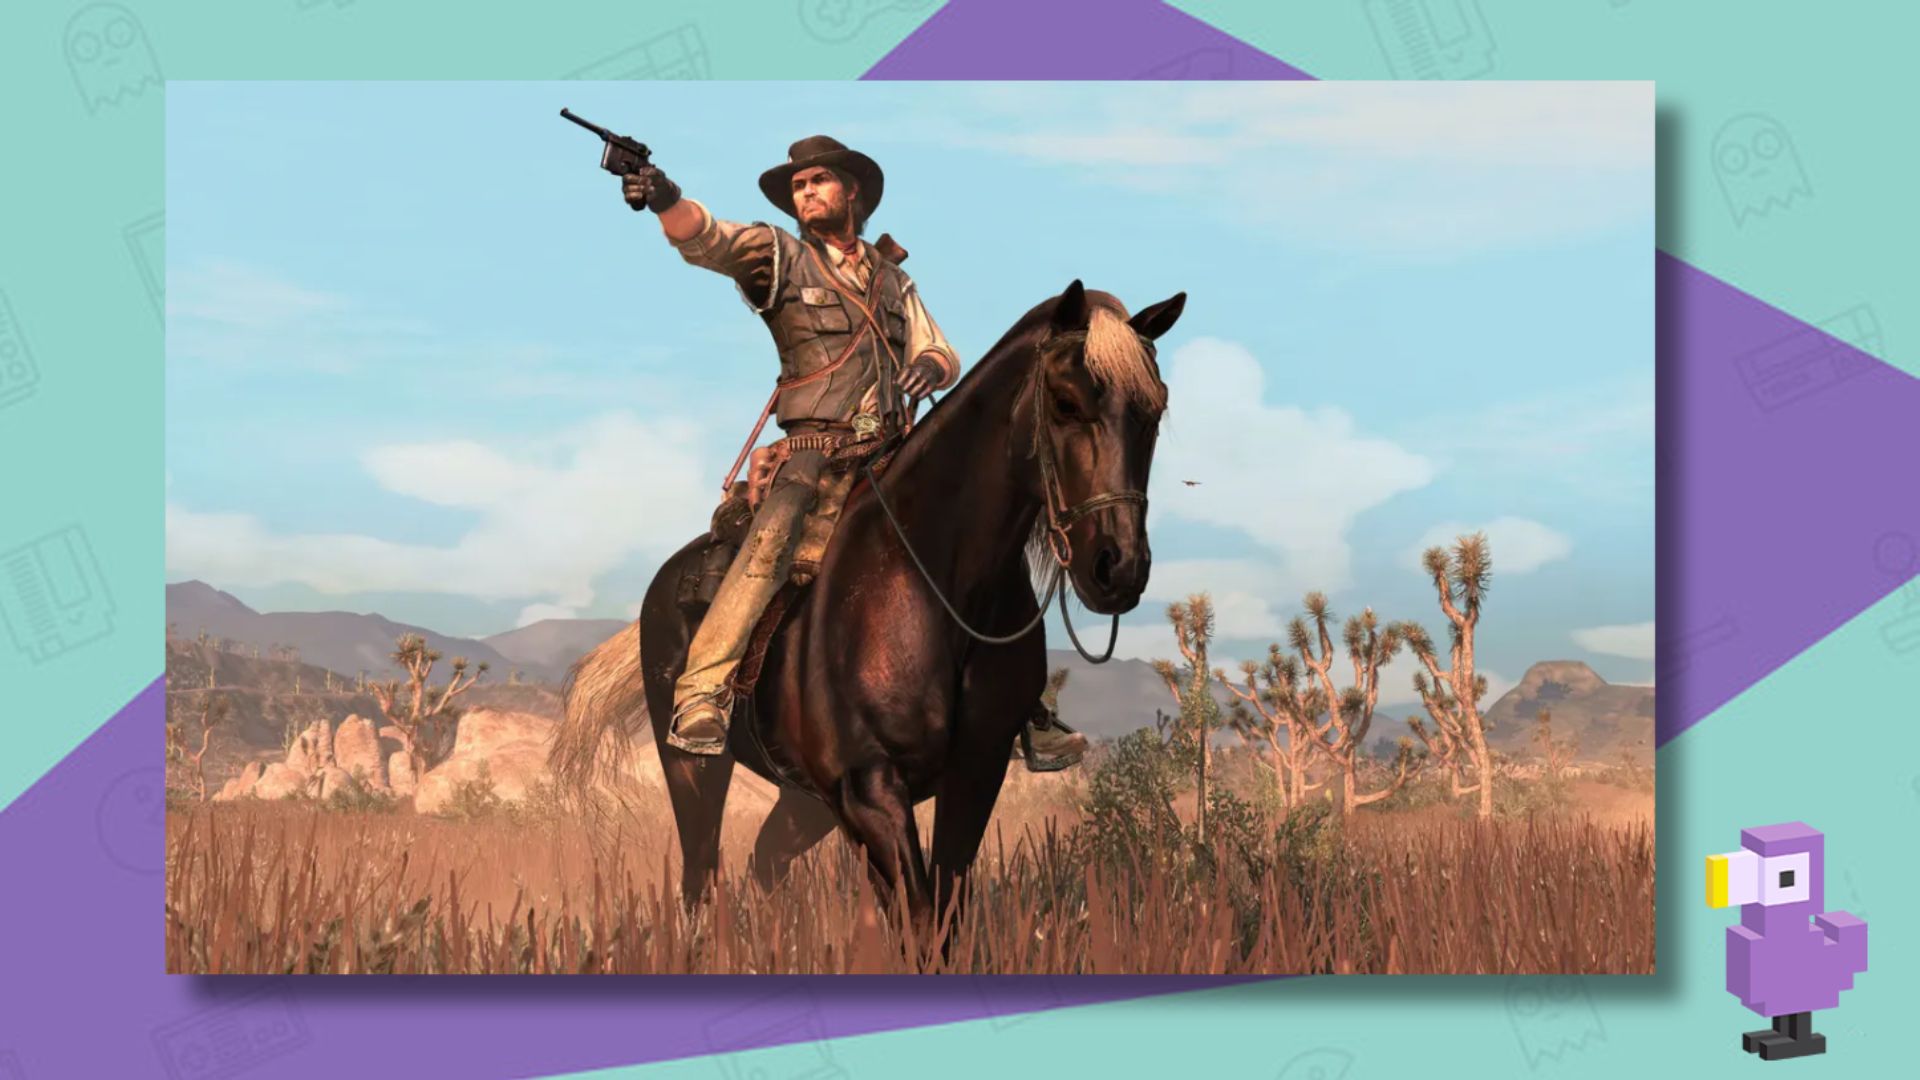 Red Dead Redemption for PS4 version 1.03 update now available